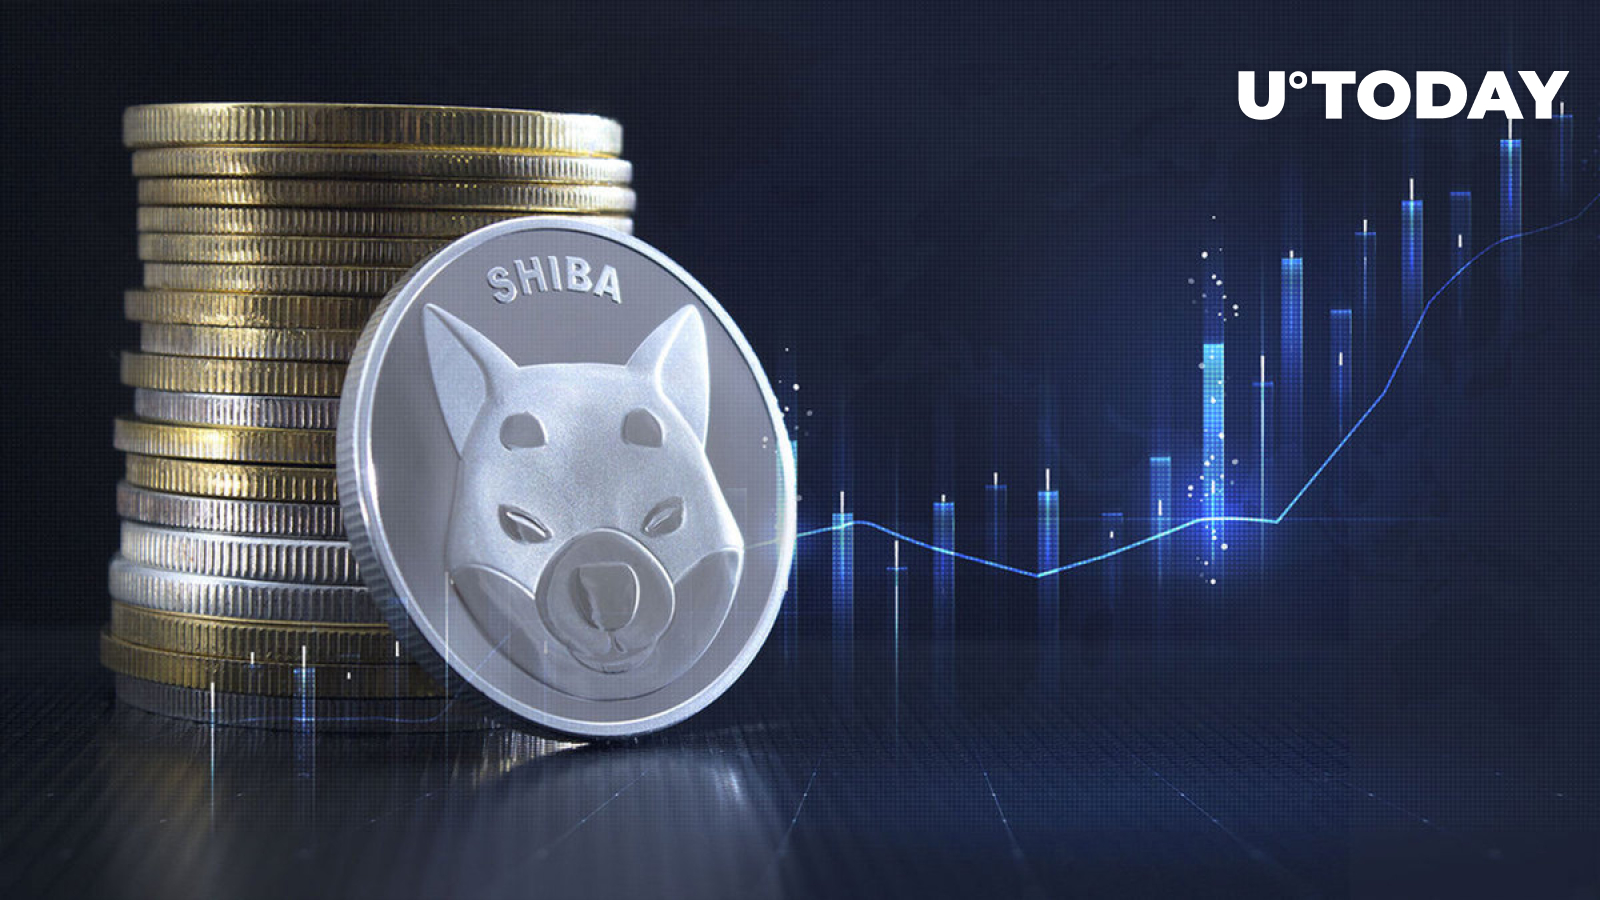 Shiba Inu (SHIB) up 11% Against Dogecoin (DOGE) Thanks to This Flaw